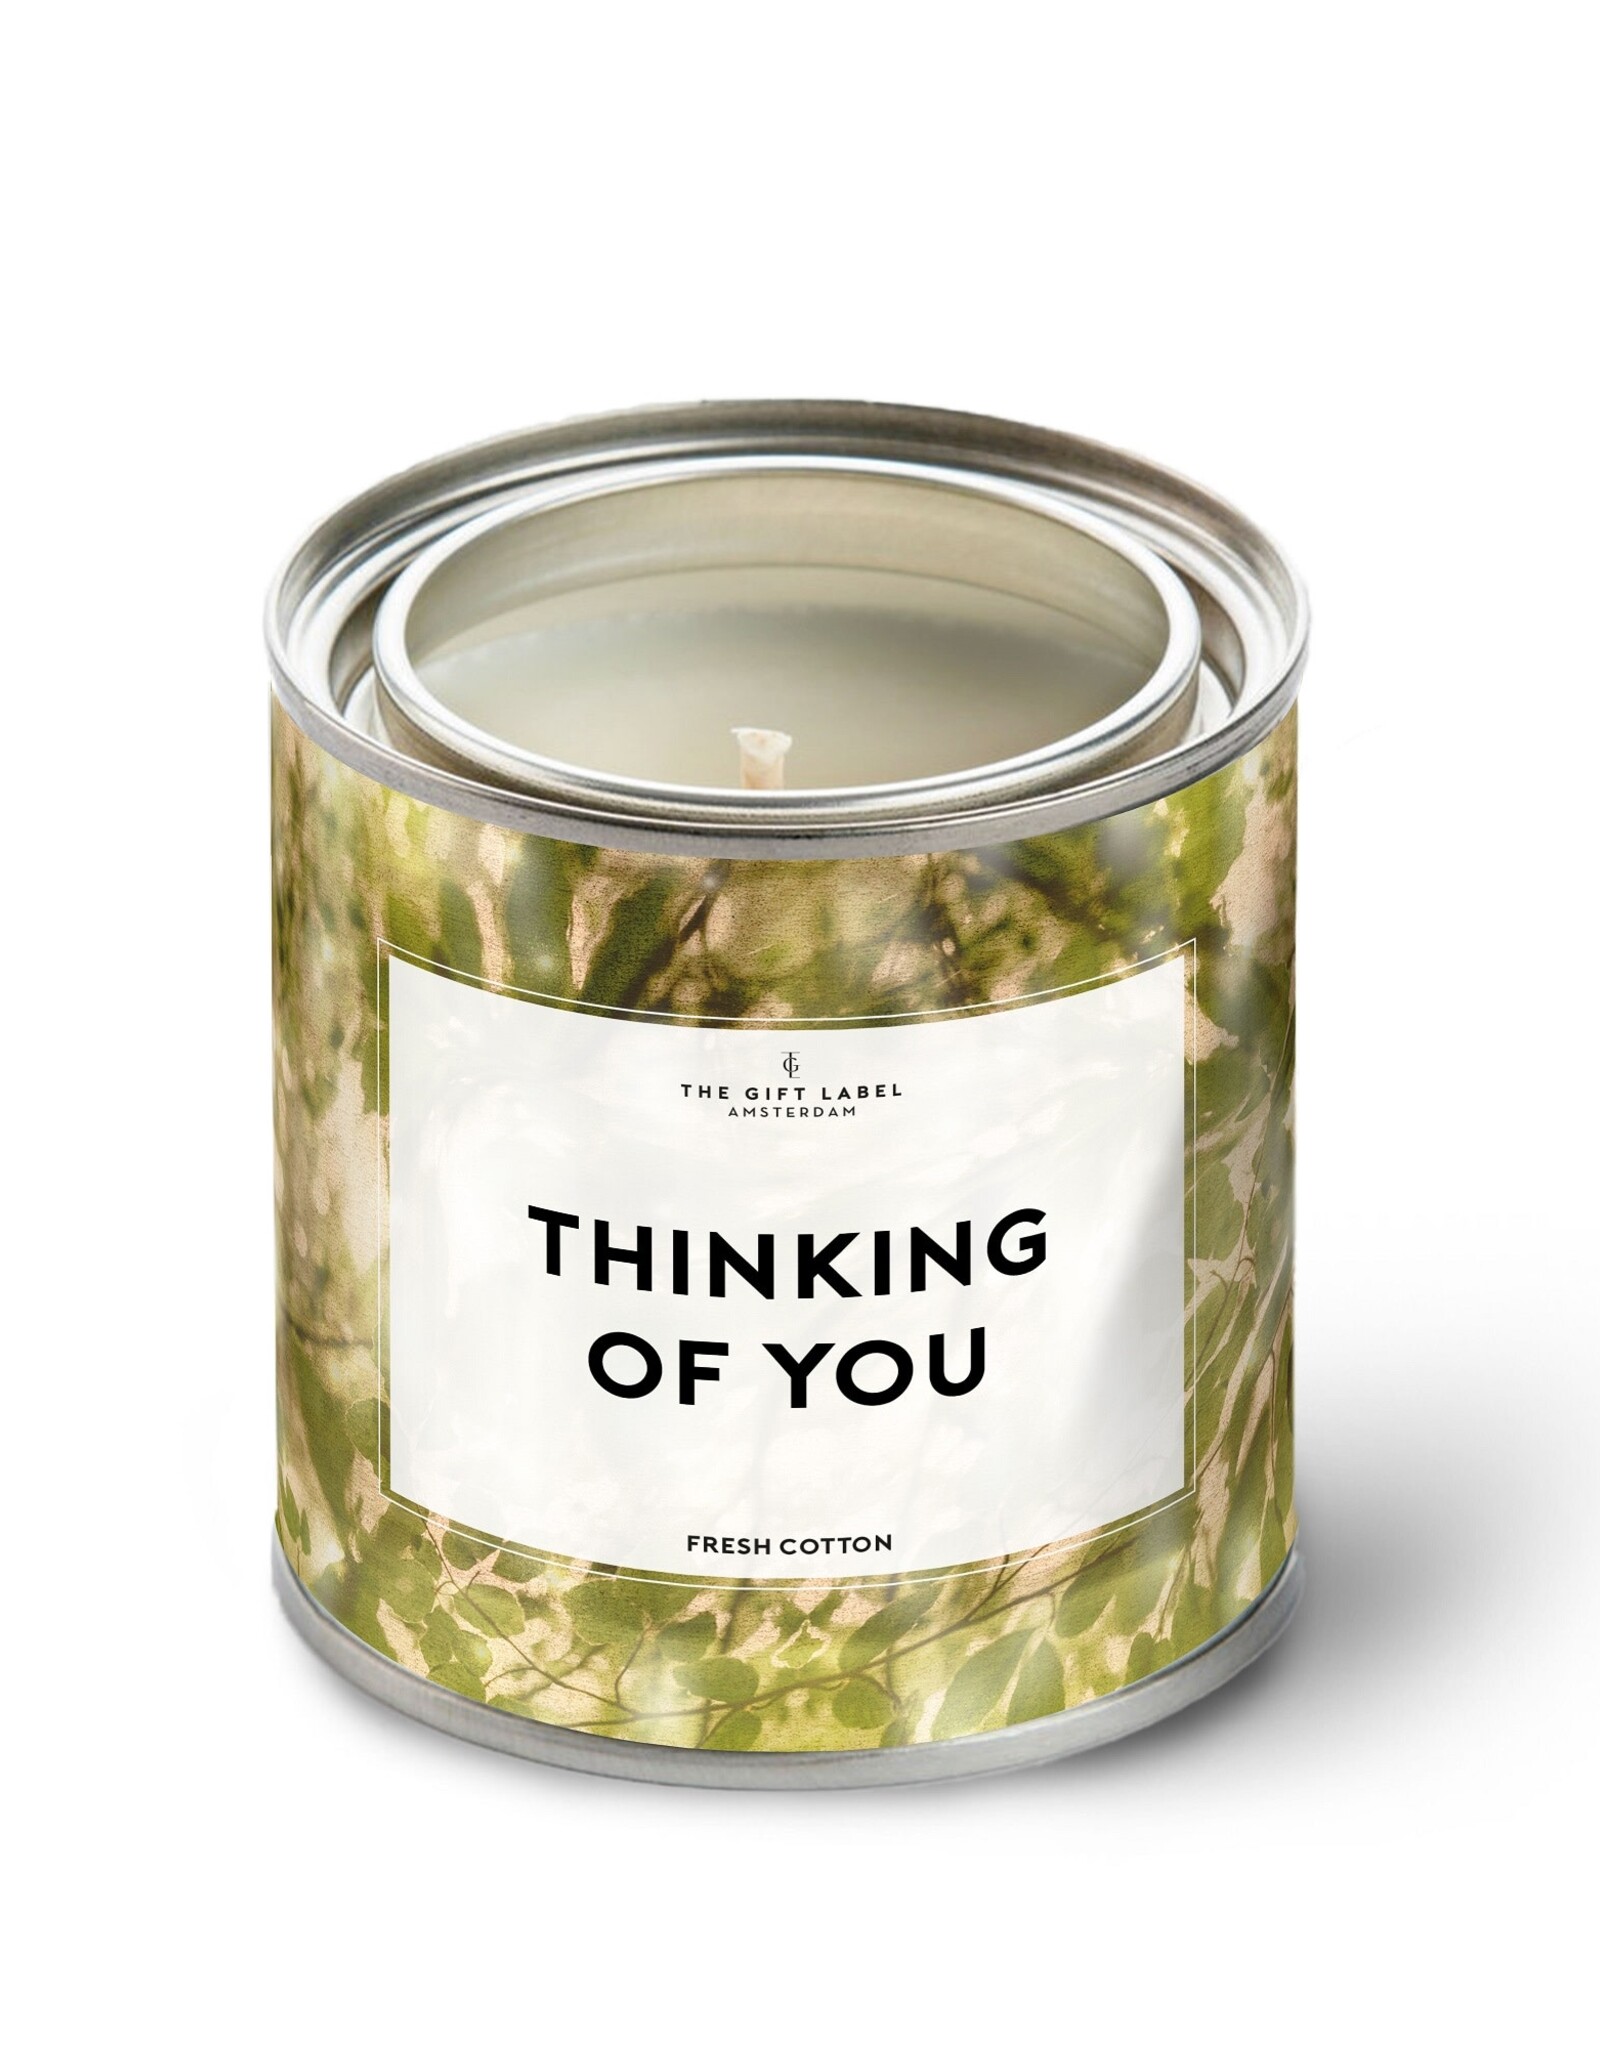 The Gift Label Geurkaars in Blik 310gr Thinking of You - The Gift Label